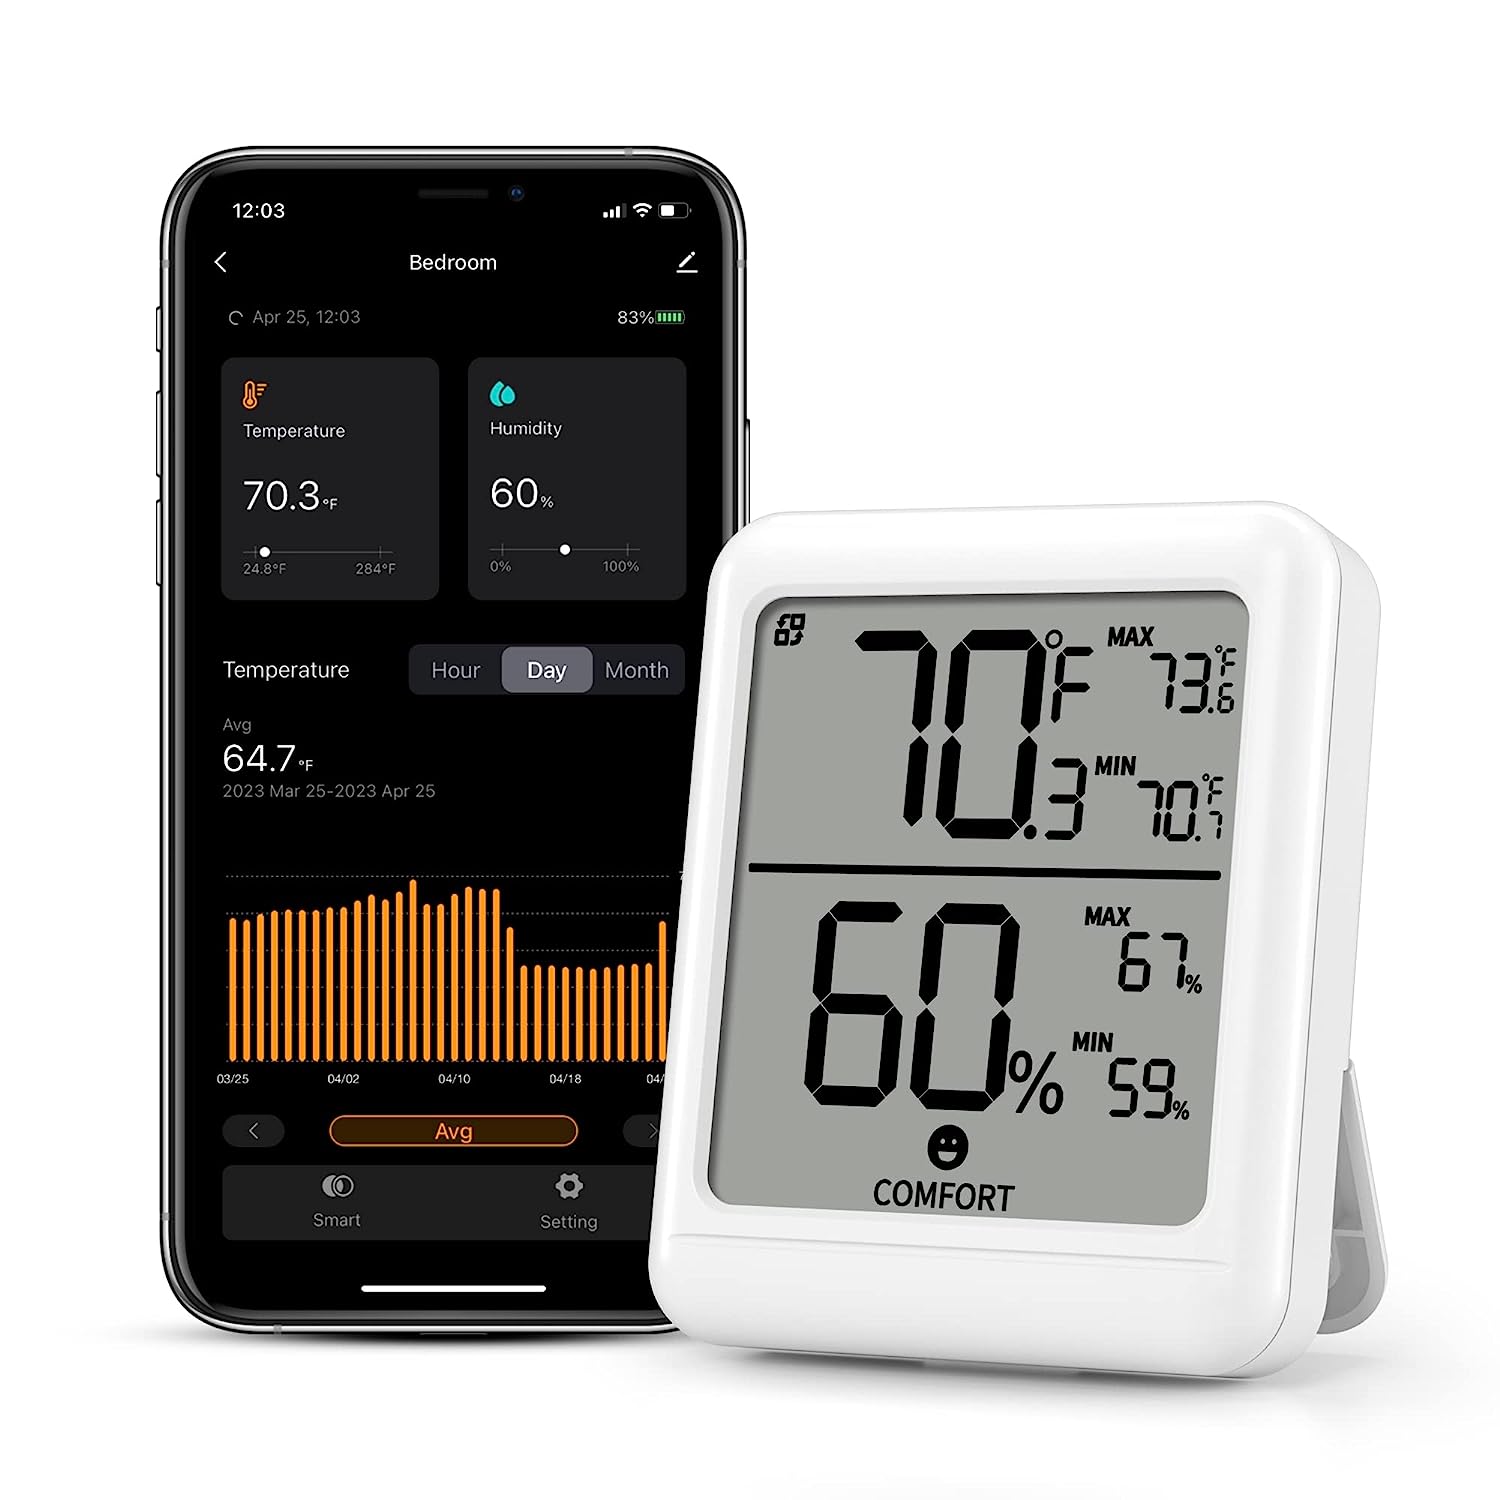 Govee Wi-Fi and Bluetooth thermometer/hygrometers can work with Alexa from  $13